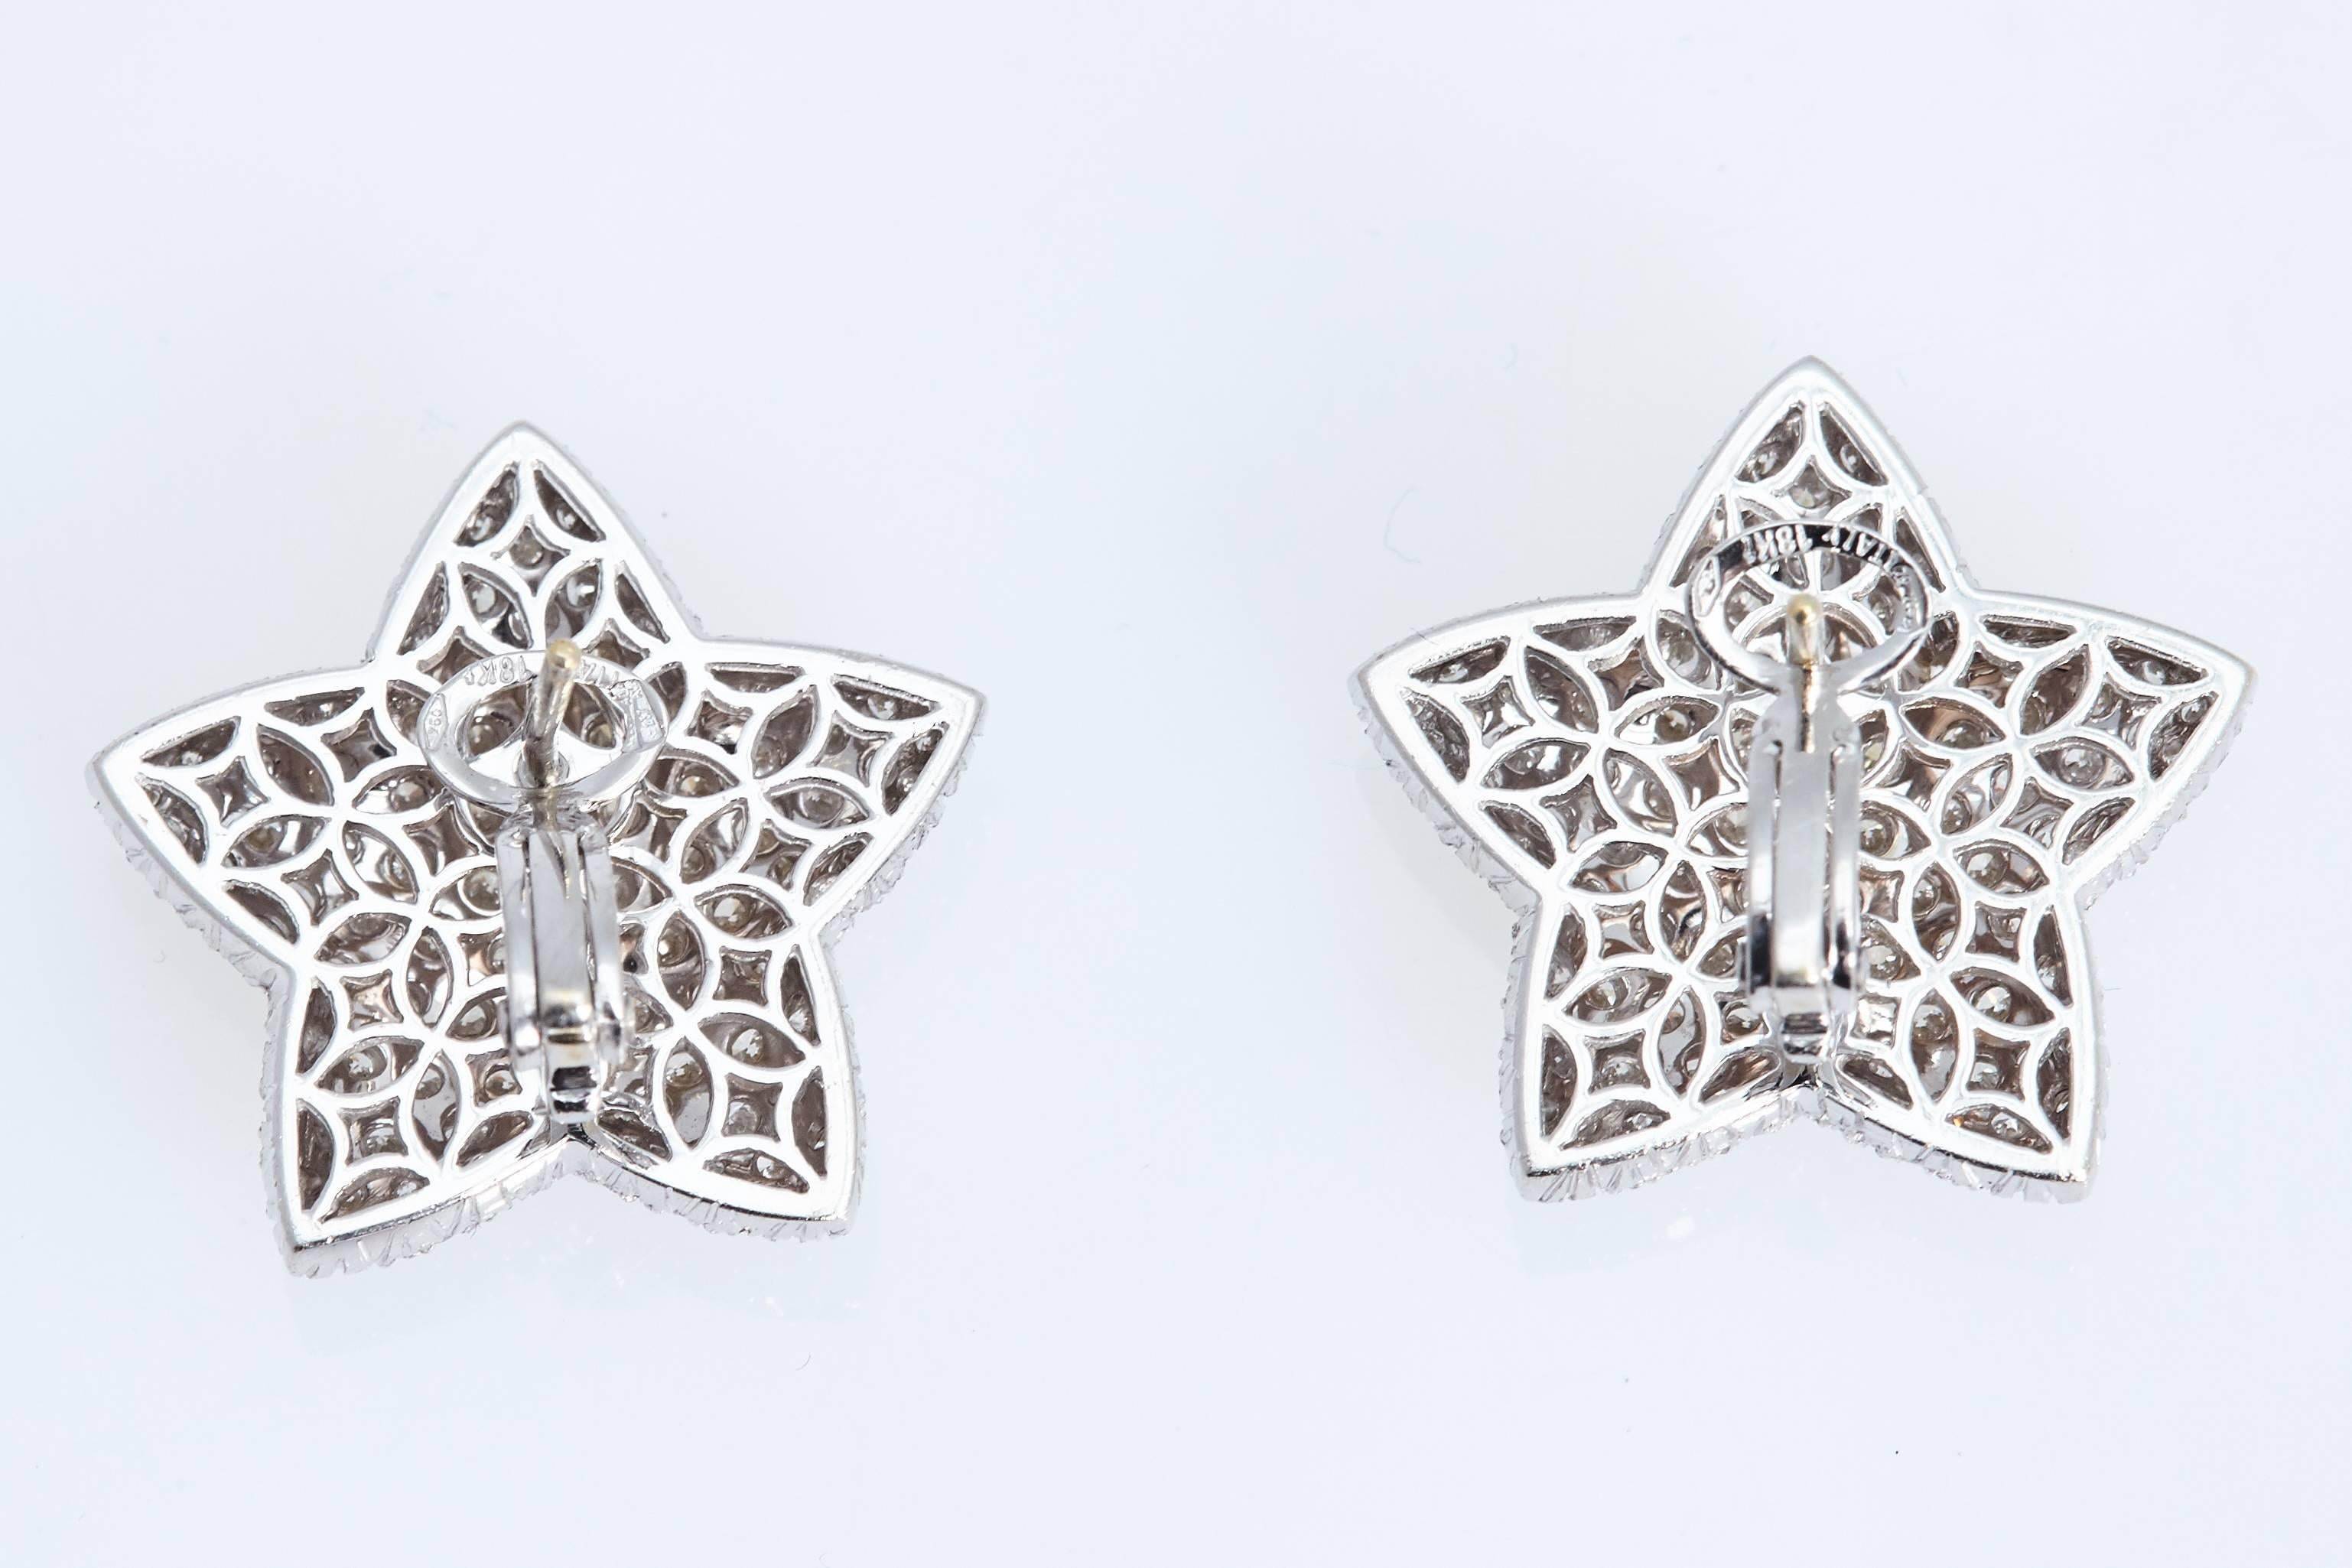 One pair of five point star earrings made up of 200 round diamonds with a total weight of approximately 4.80 carats.  The diamonds are "G/H" in color and "VS" in clarity. 
The earrings are 18 karat white gold and measure 1 inch